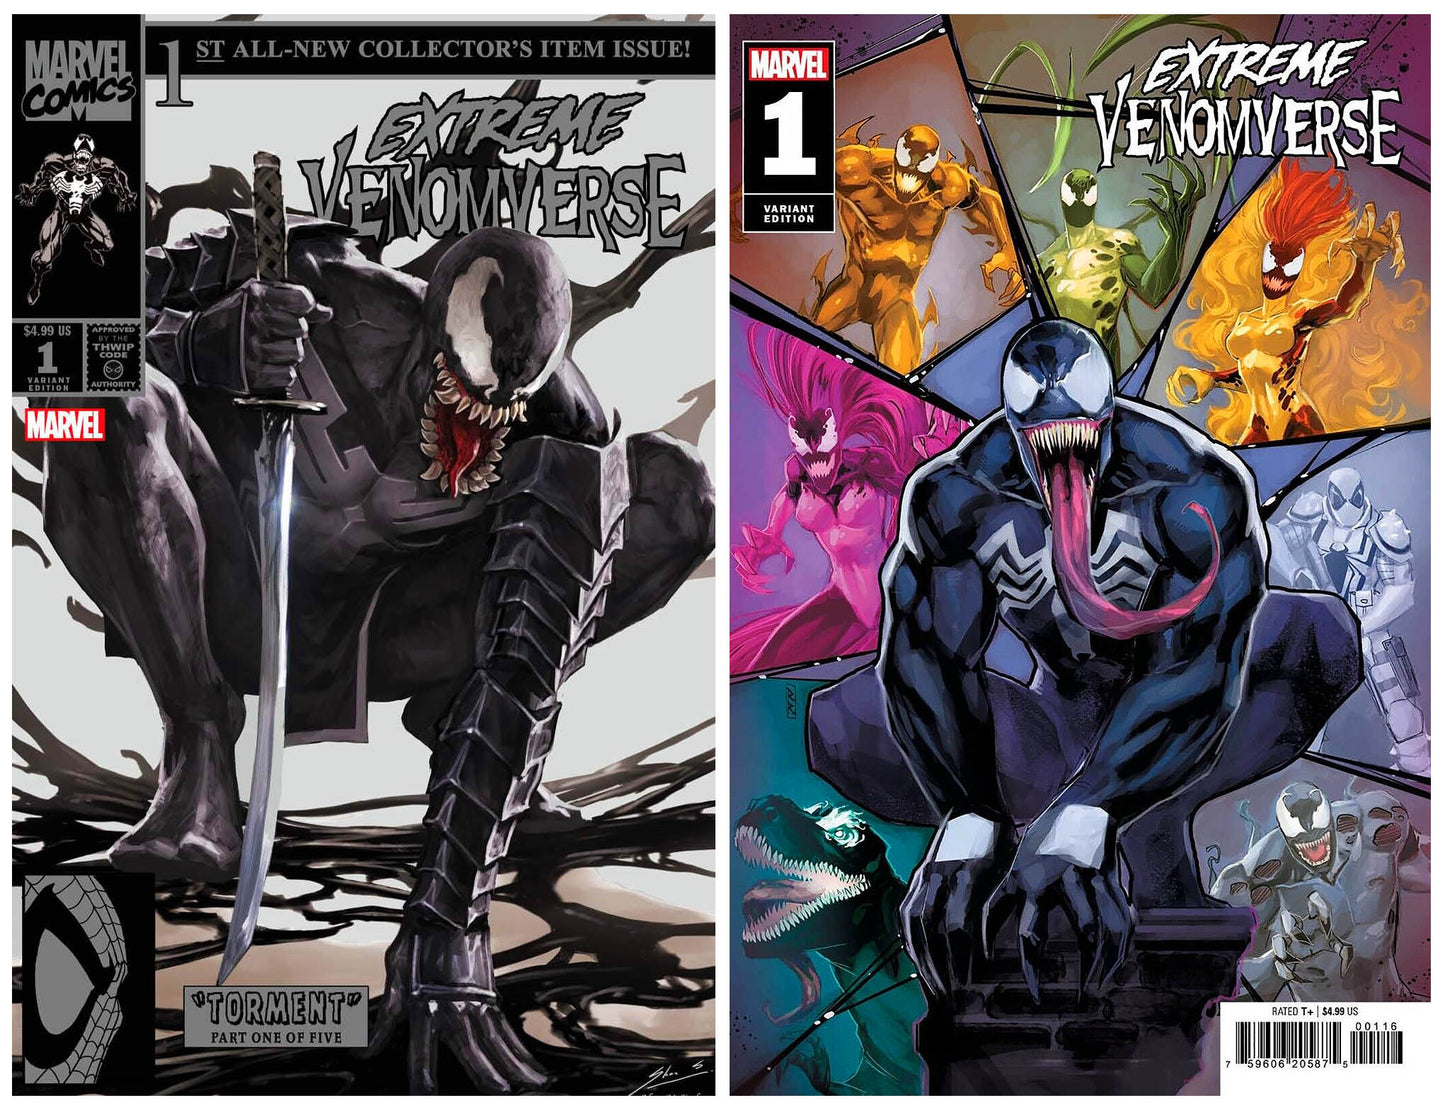 EXTREME VENOMVERSE #1 SKAN SRISUWAN HOMAGE VARIANT LIMITED TO 500 COPIES WITH NUMBERED COA + 1:25 VARIANT